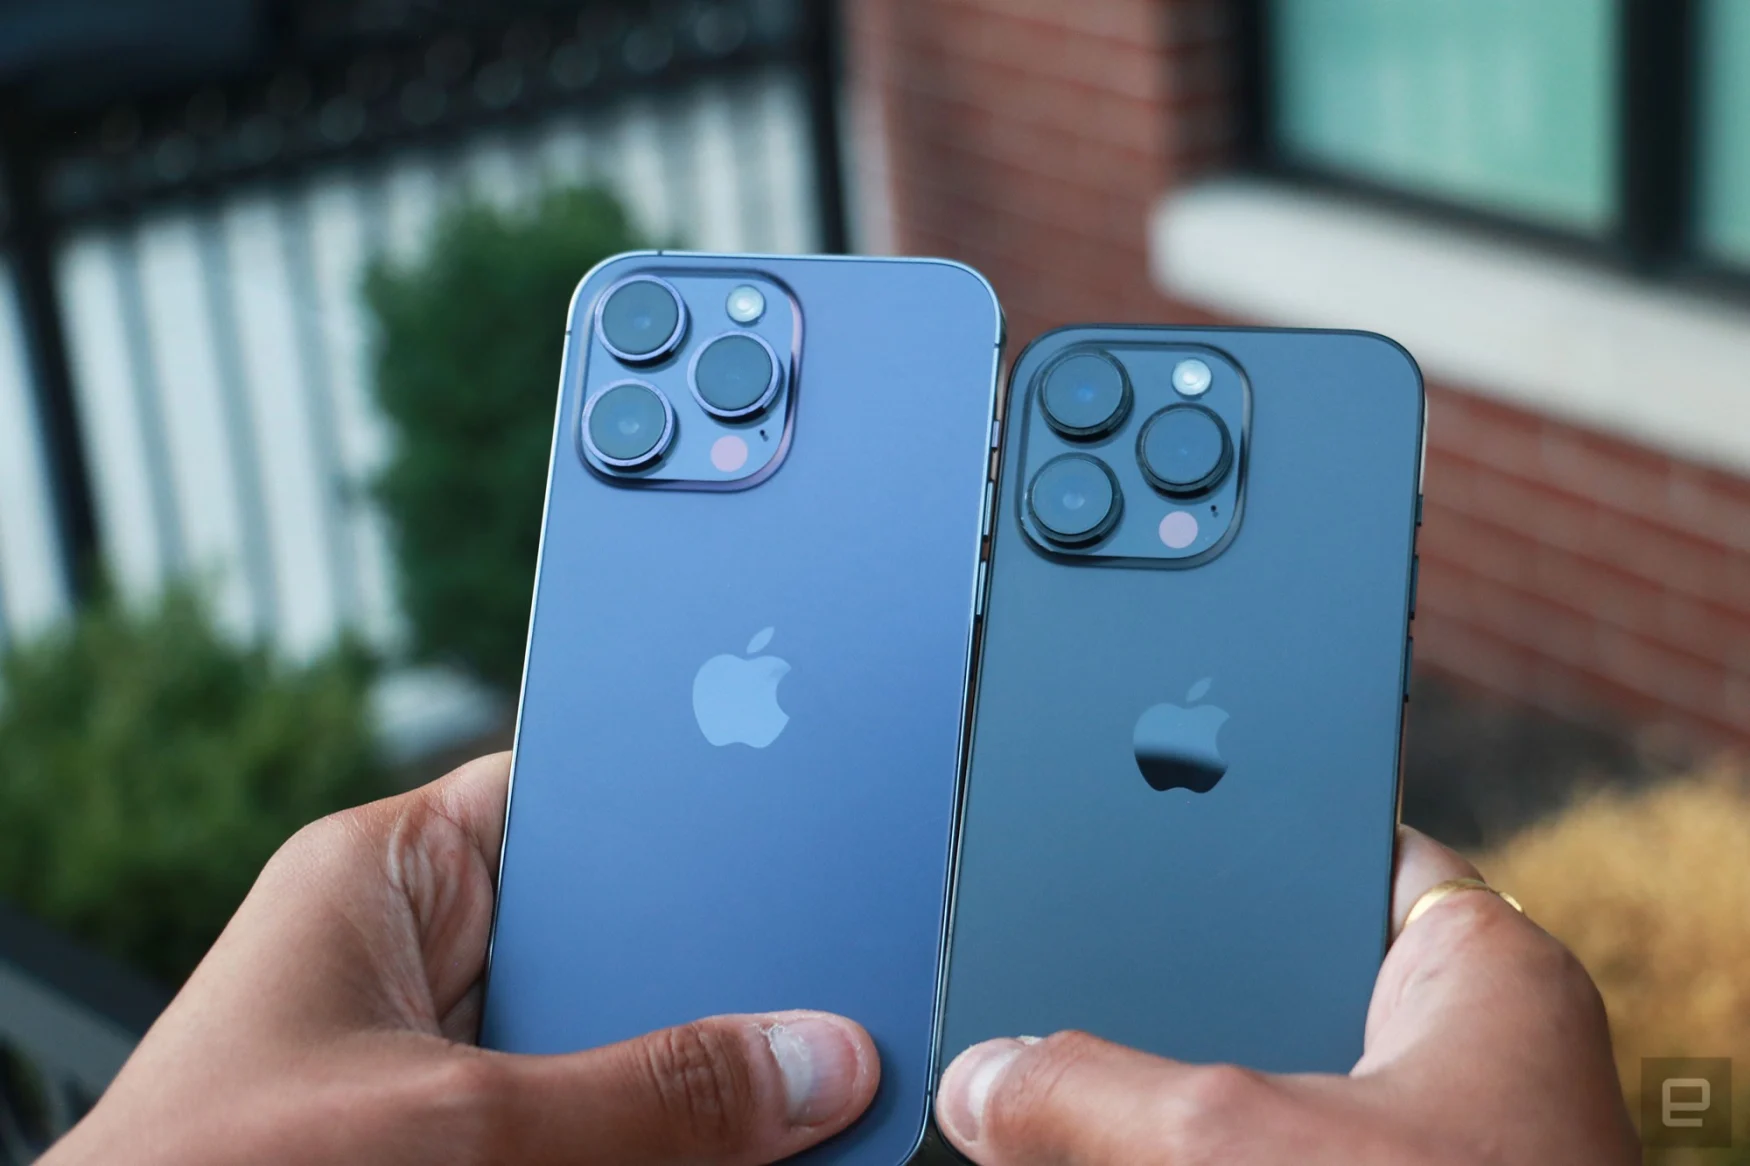 The iPhone 14 Pro Max and iPhone 14 Pro held in two hands, placed next to each other with their rear cameras facing out.